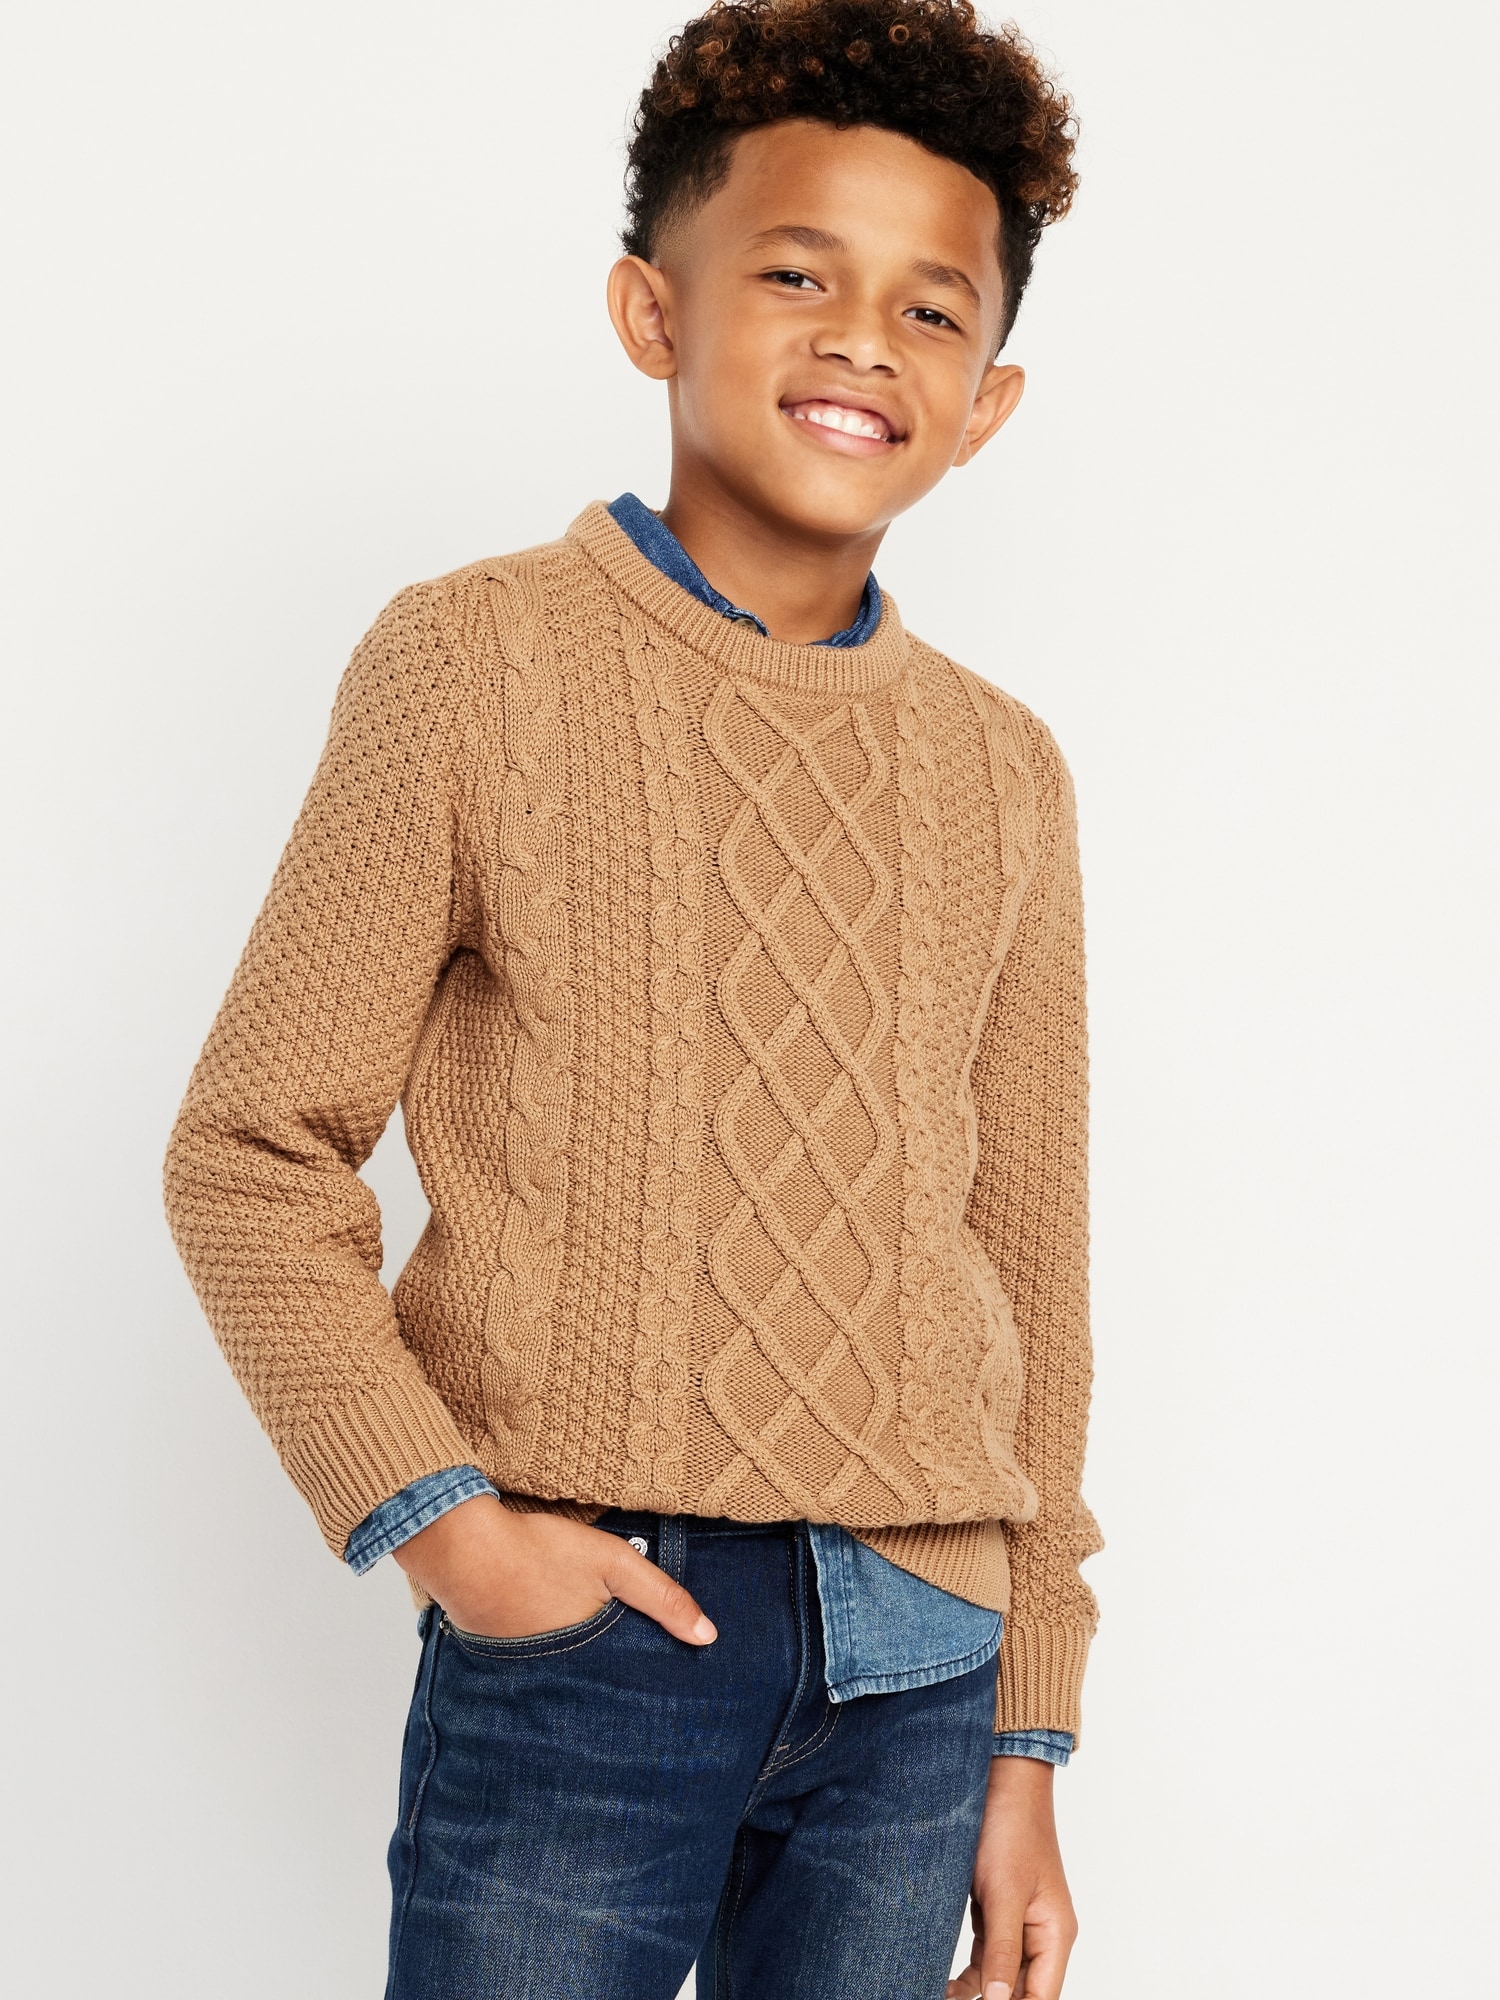 Long-Sleeve Cable-Knit Crew Neck Sweater for Boys